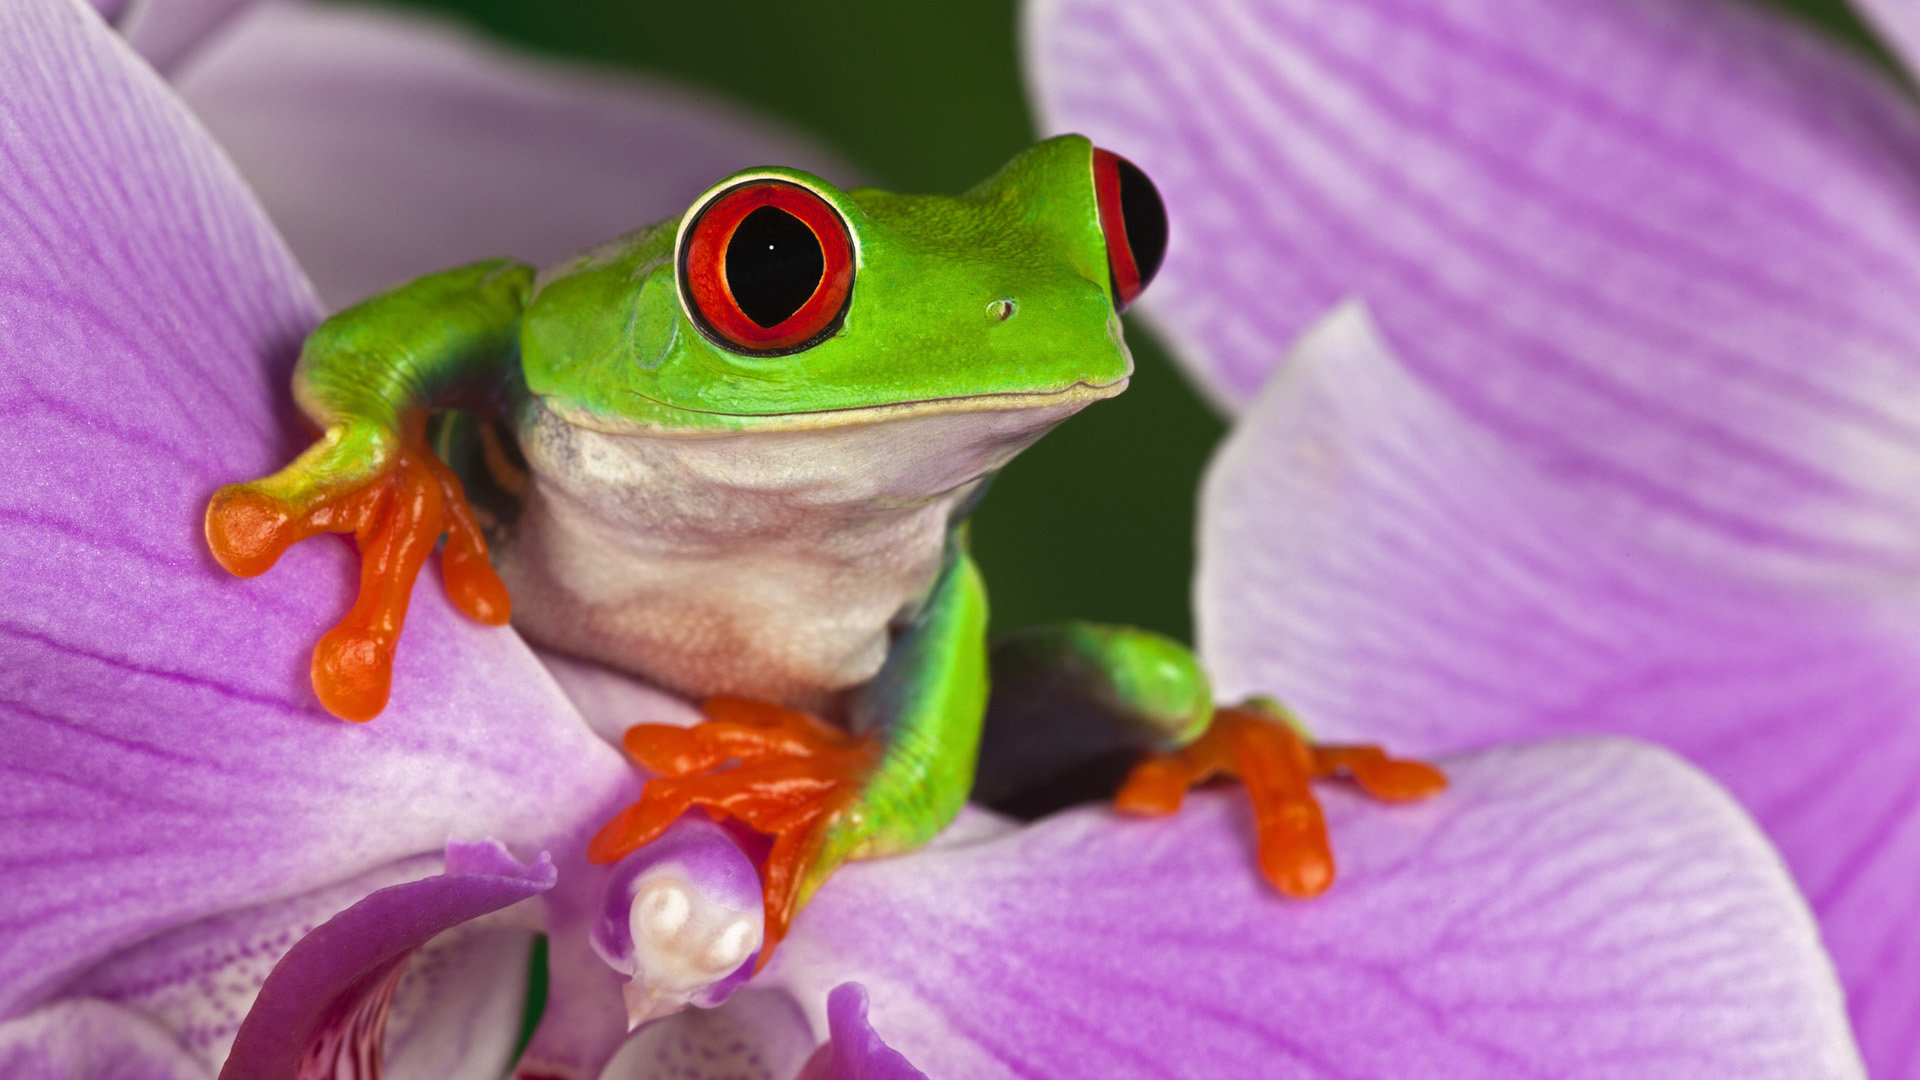 Red-eyed tree frog wallpapers, Full HD 1080p, Desktop backgrounds, Animal photography, 1920x1080 Full HD Desktop